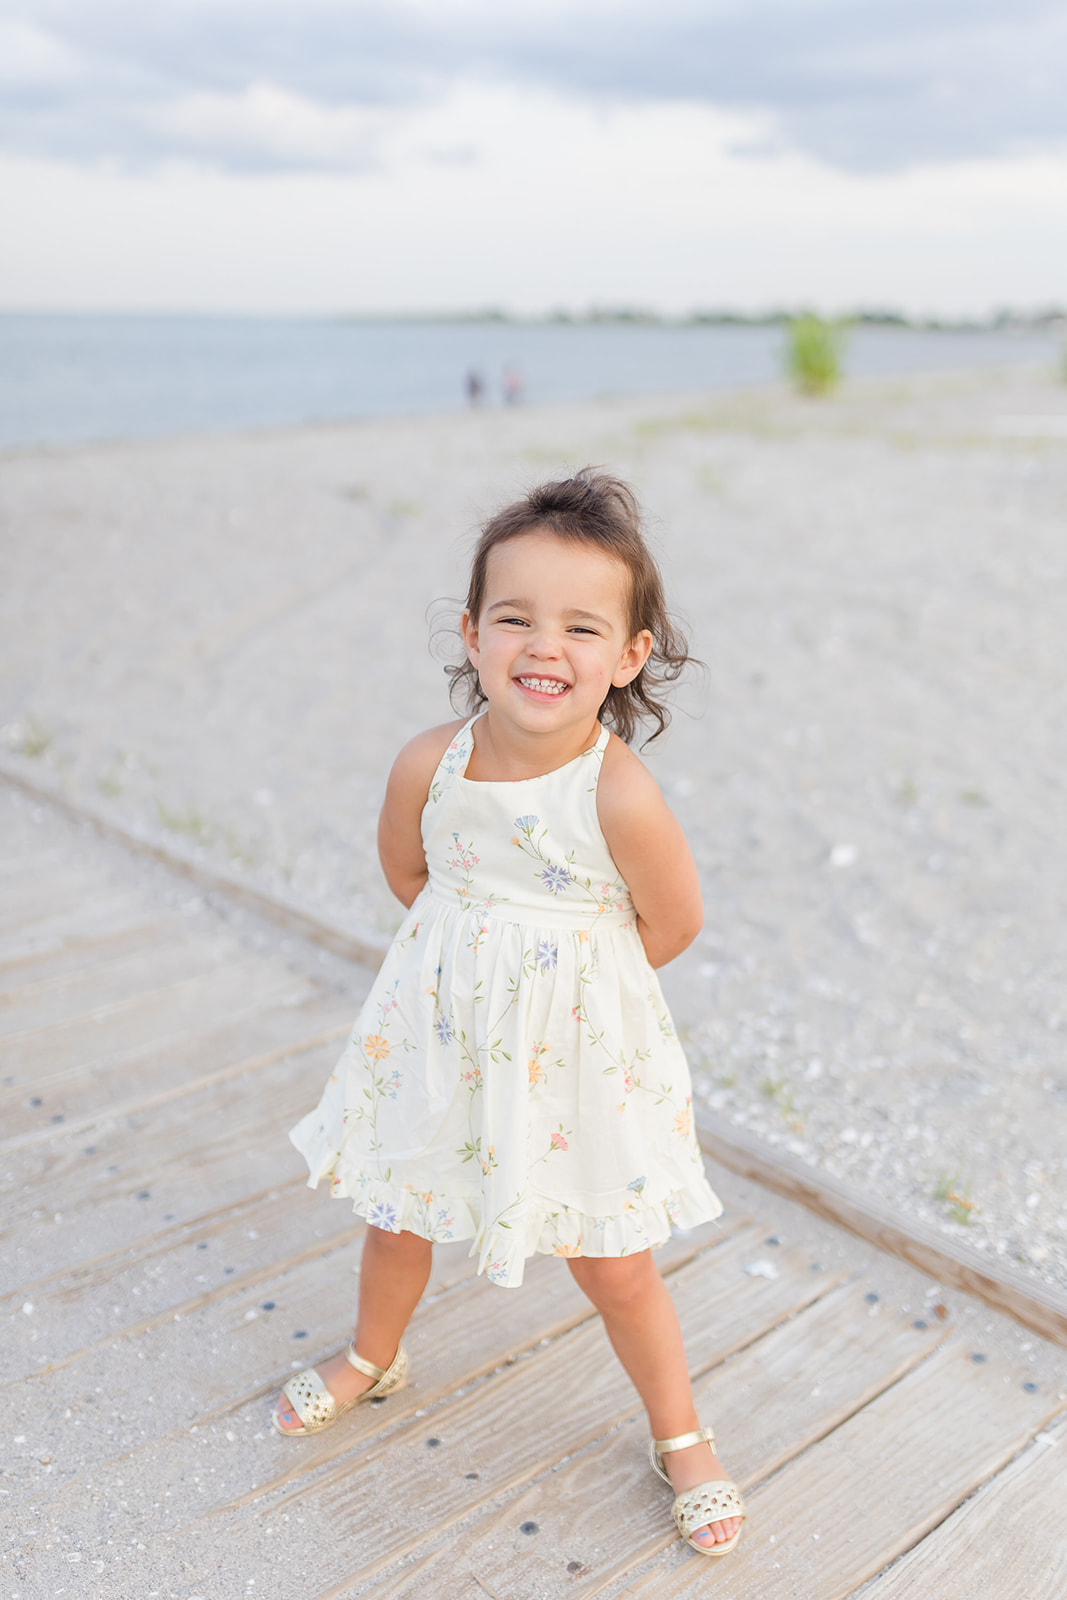 A toddler girl in a white dress stands on a beach boardwalk smiling after visiting Preschools in Trumbull CT